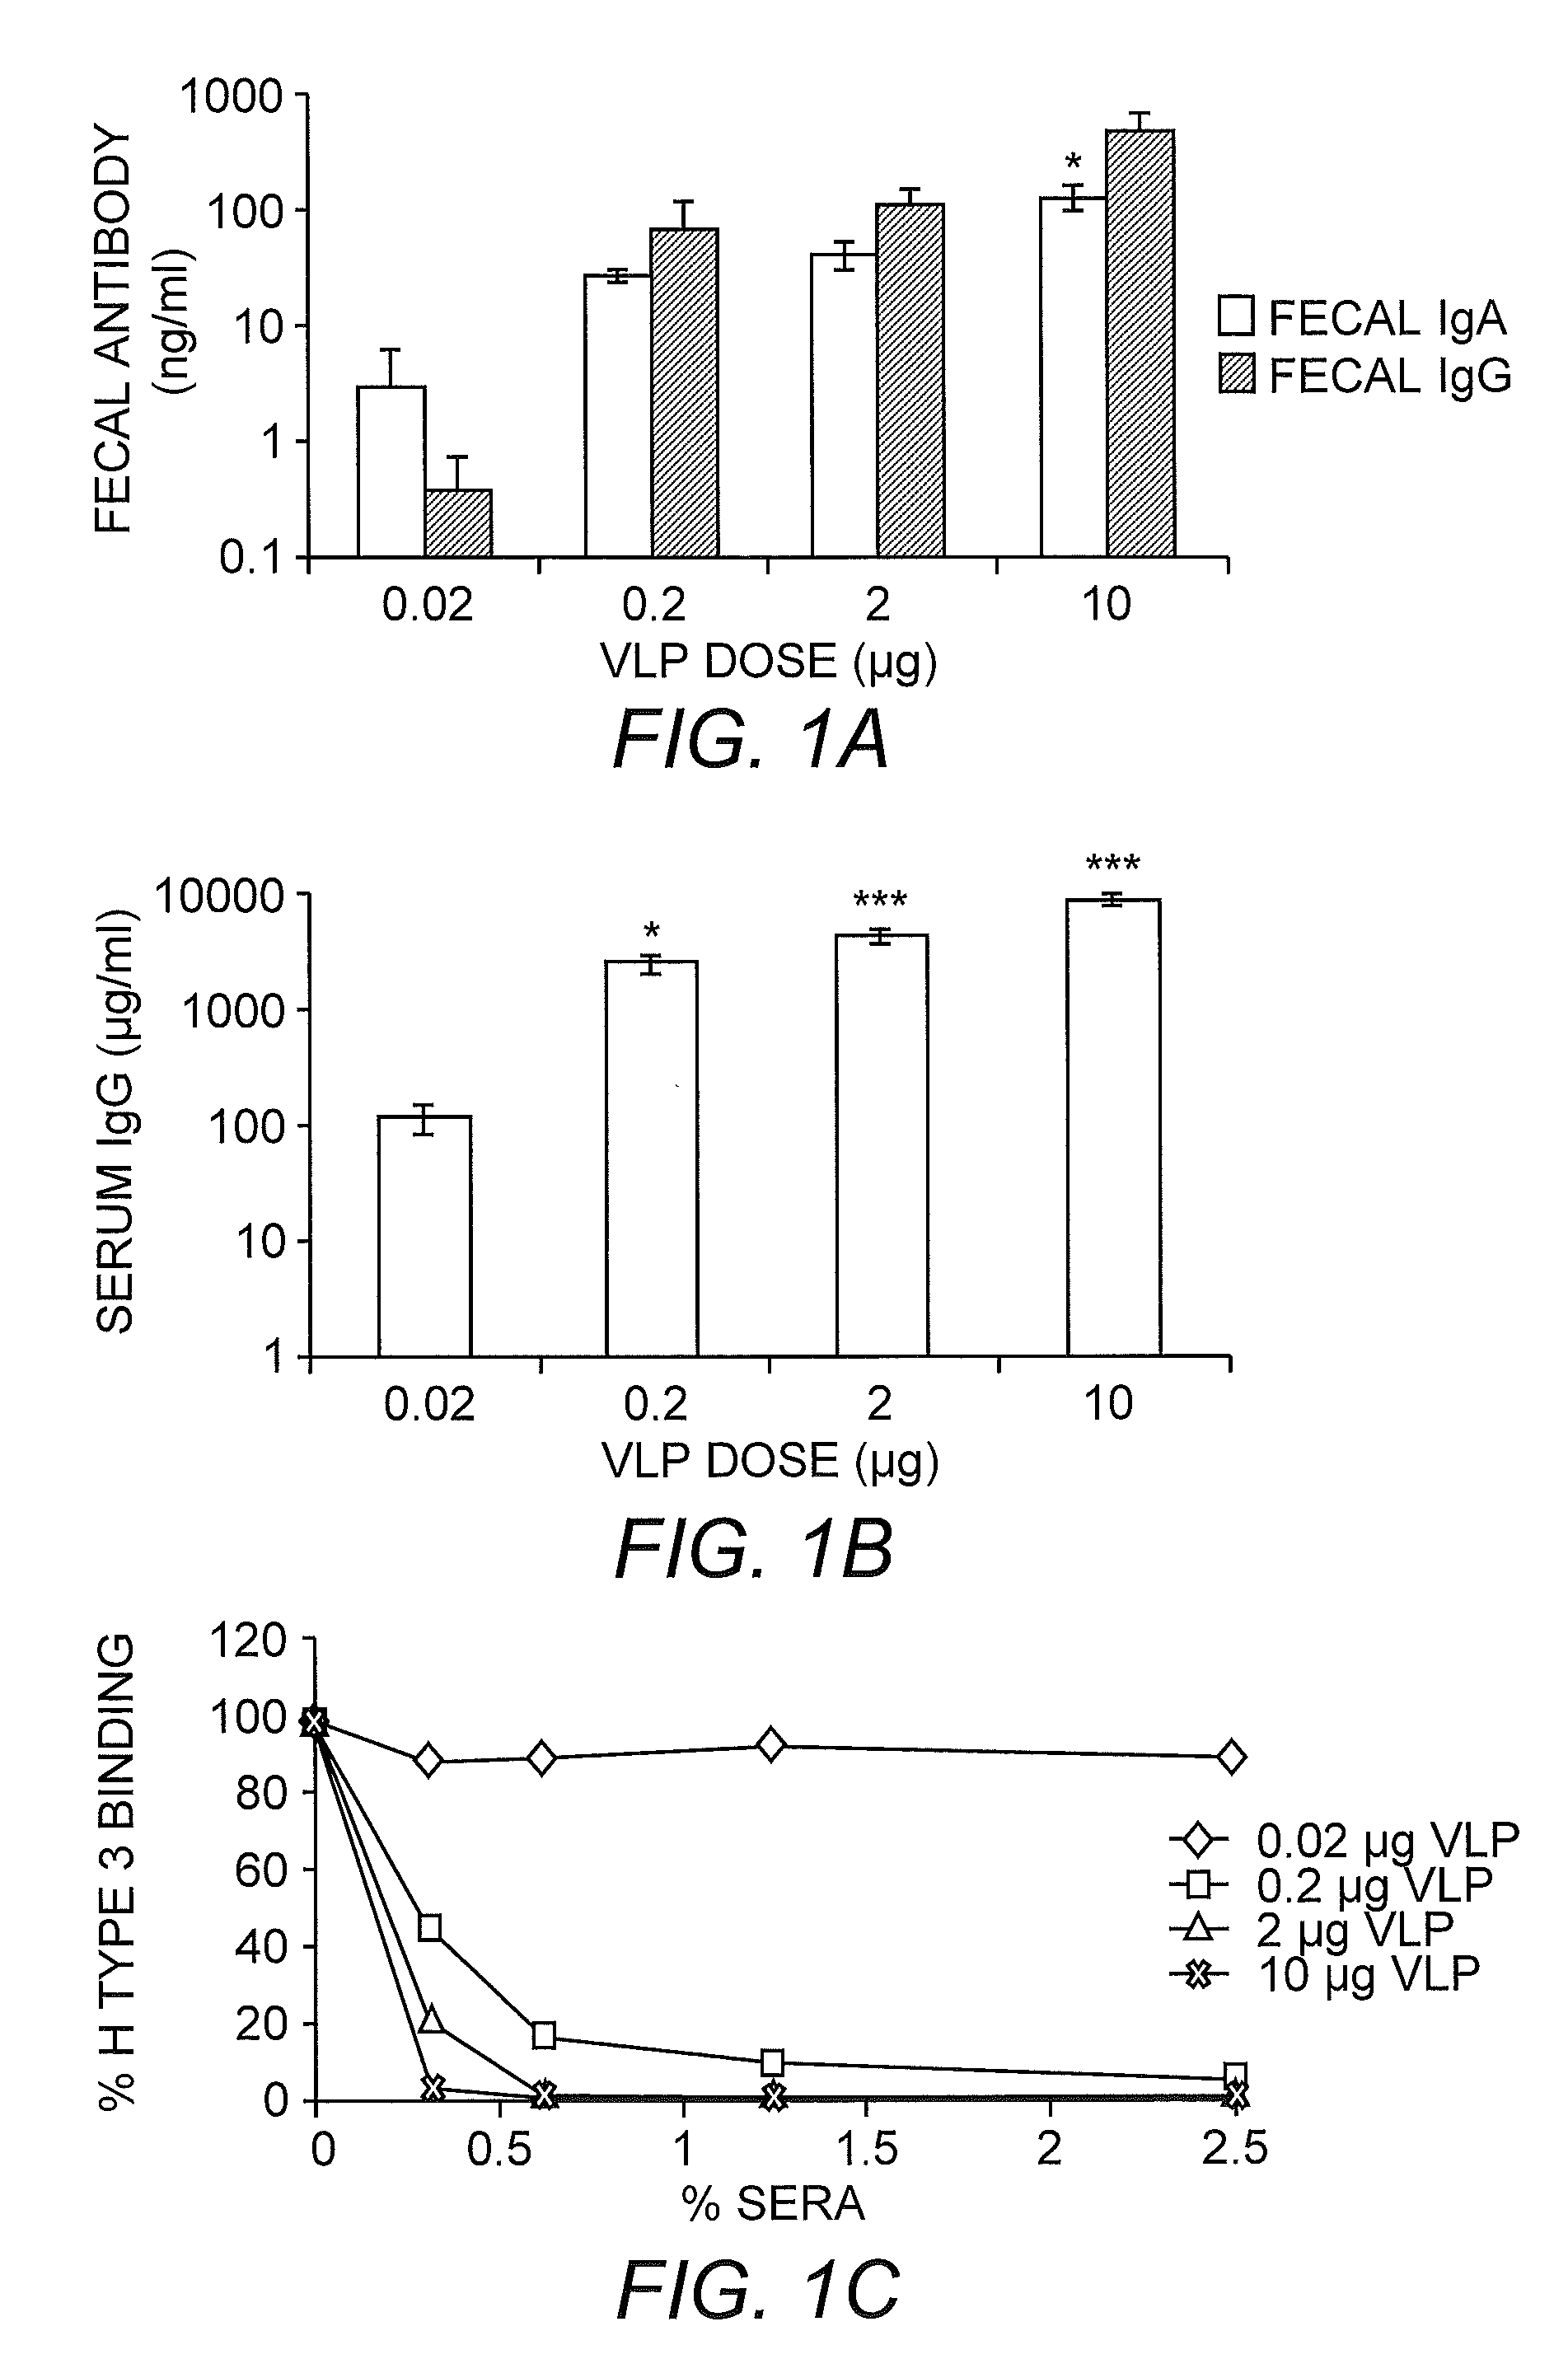 Multivalent Immunogenic Compositions Against Noroviruses and Methods of Use